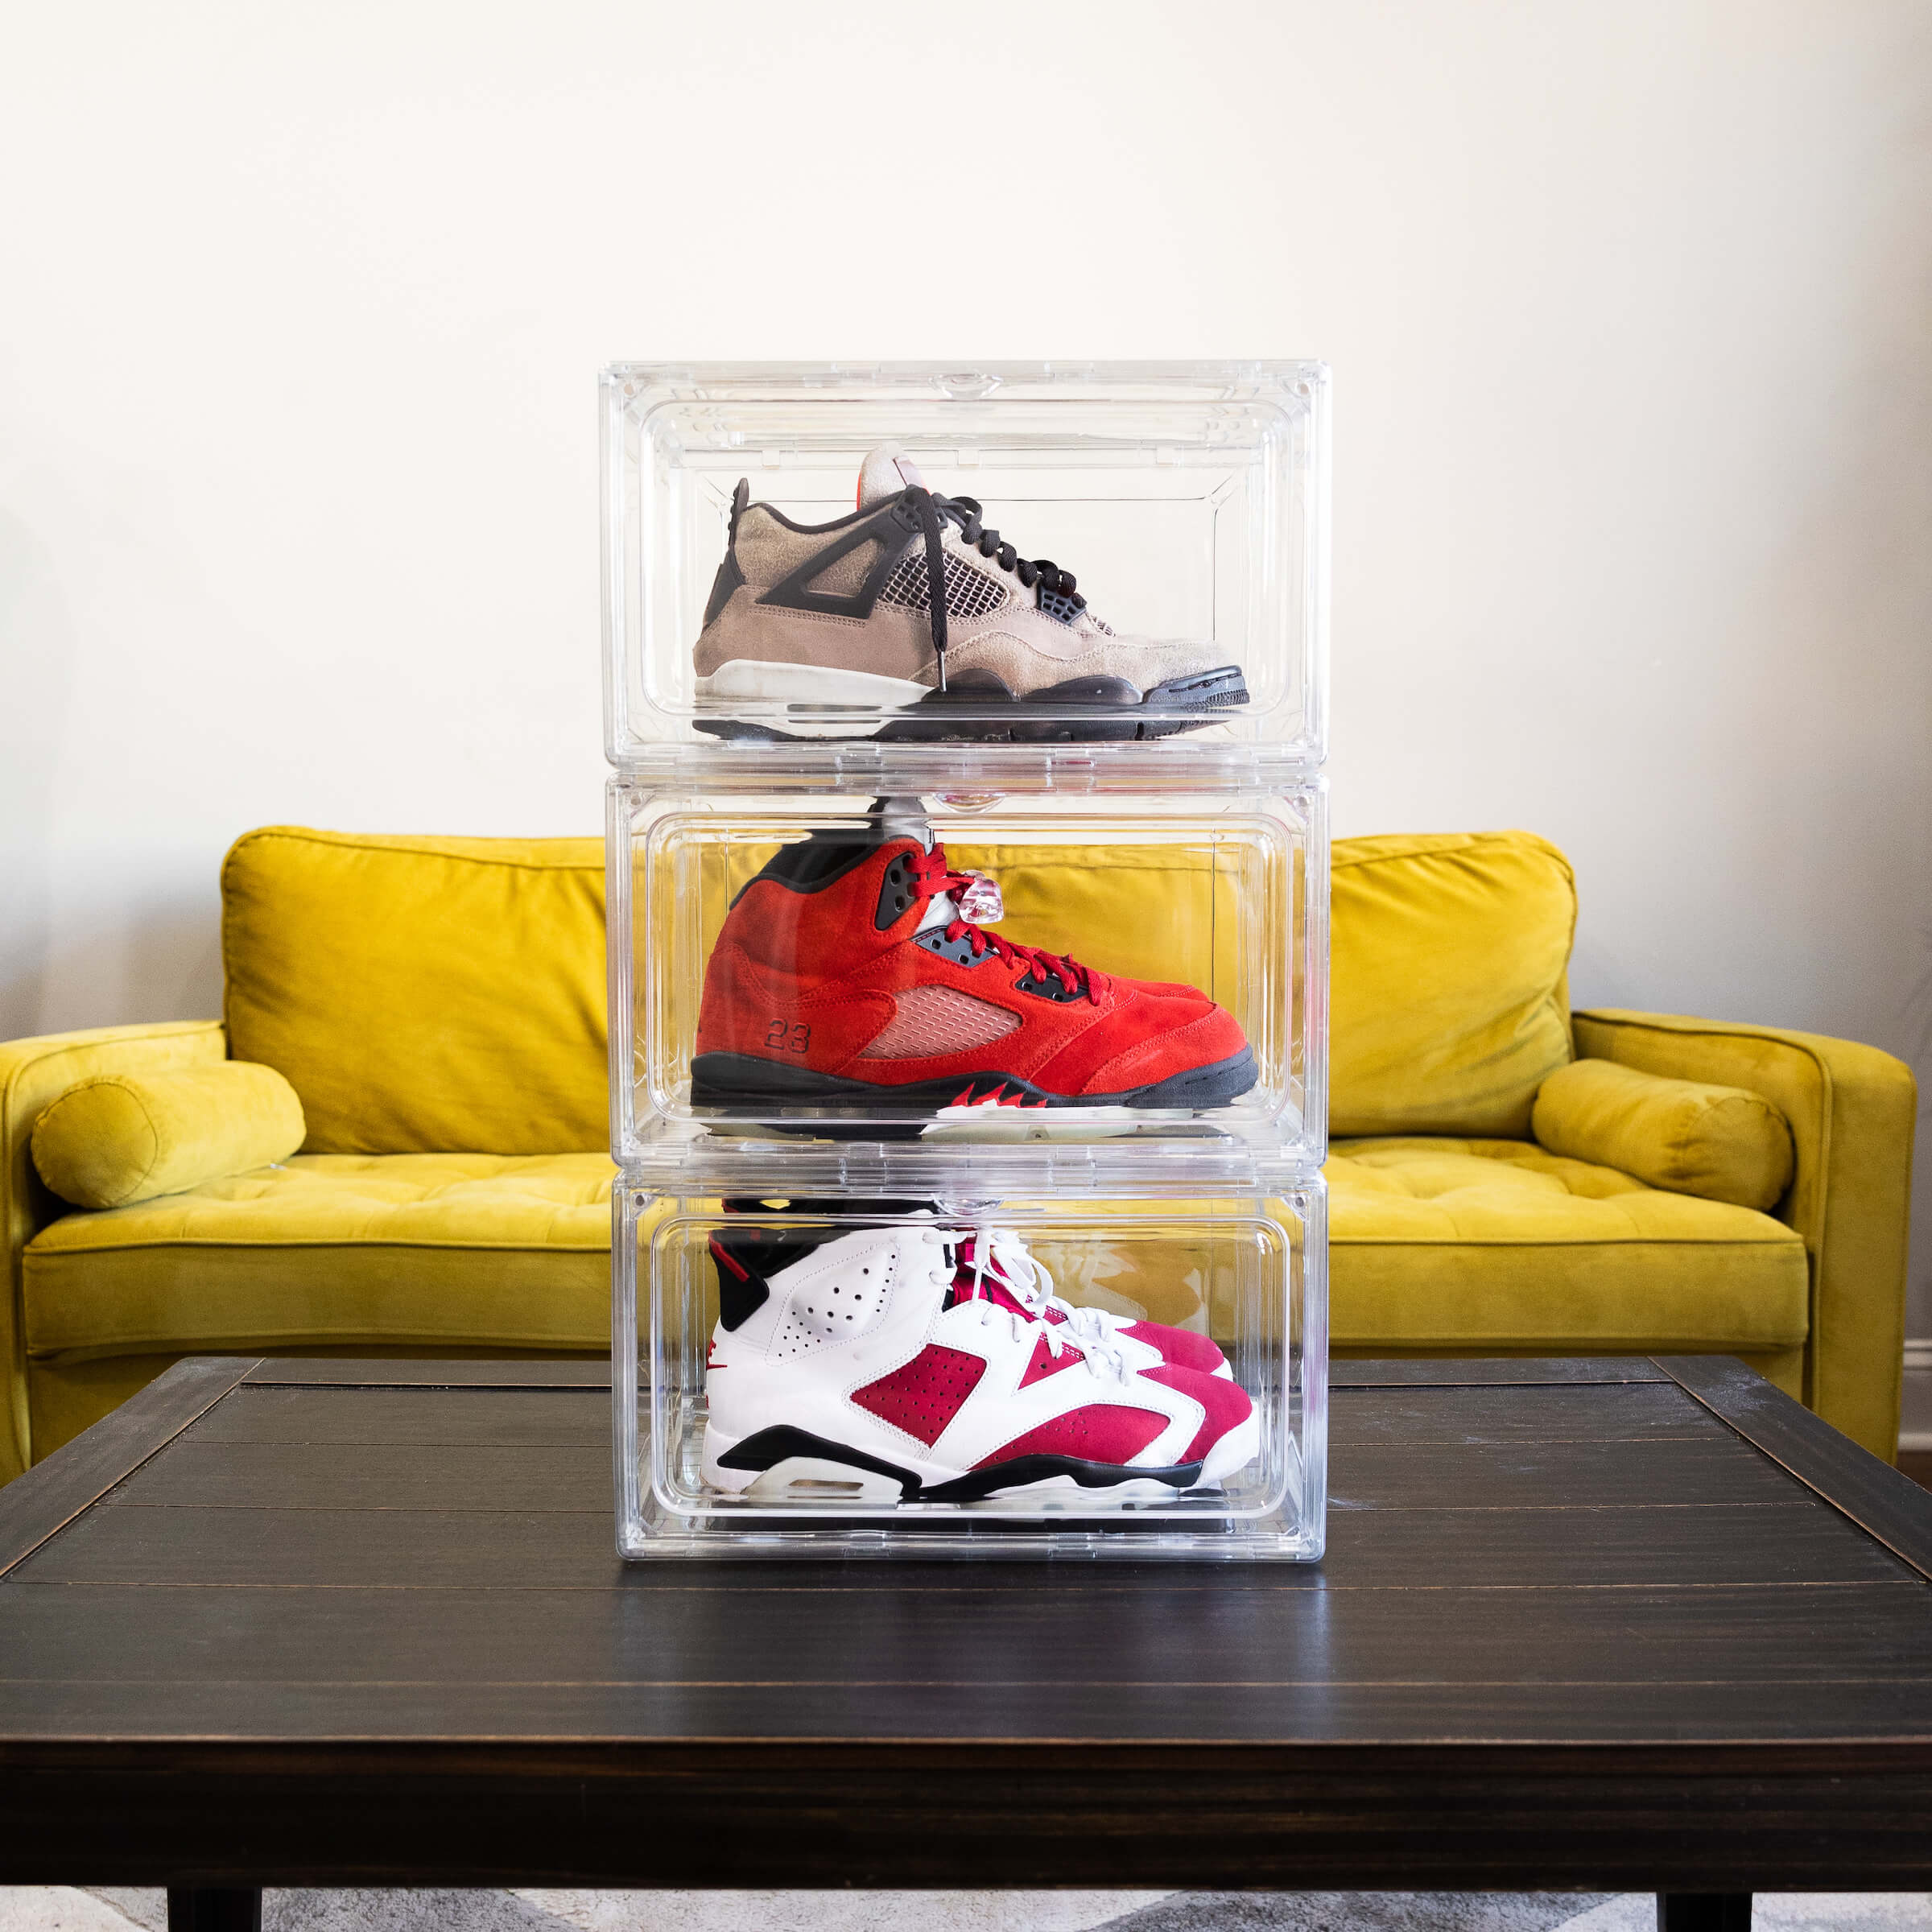 Looksee Designs - Buildable Acrylic Shoe Display Cases - Shoe storage - Shoe Boxes - Shoe Box Storage